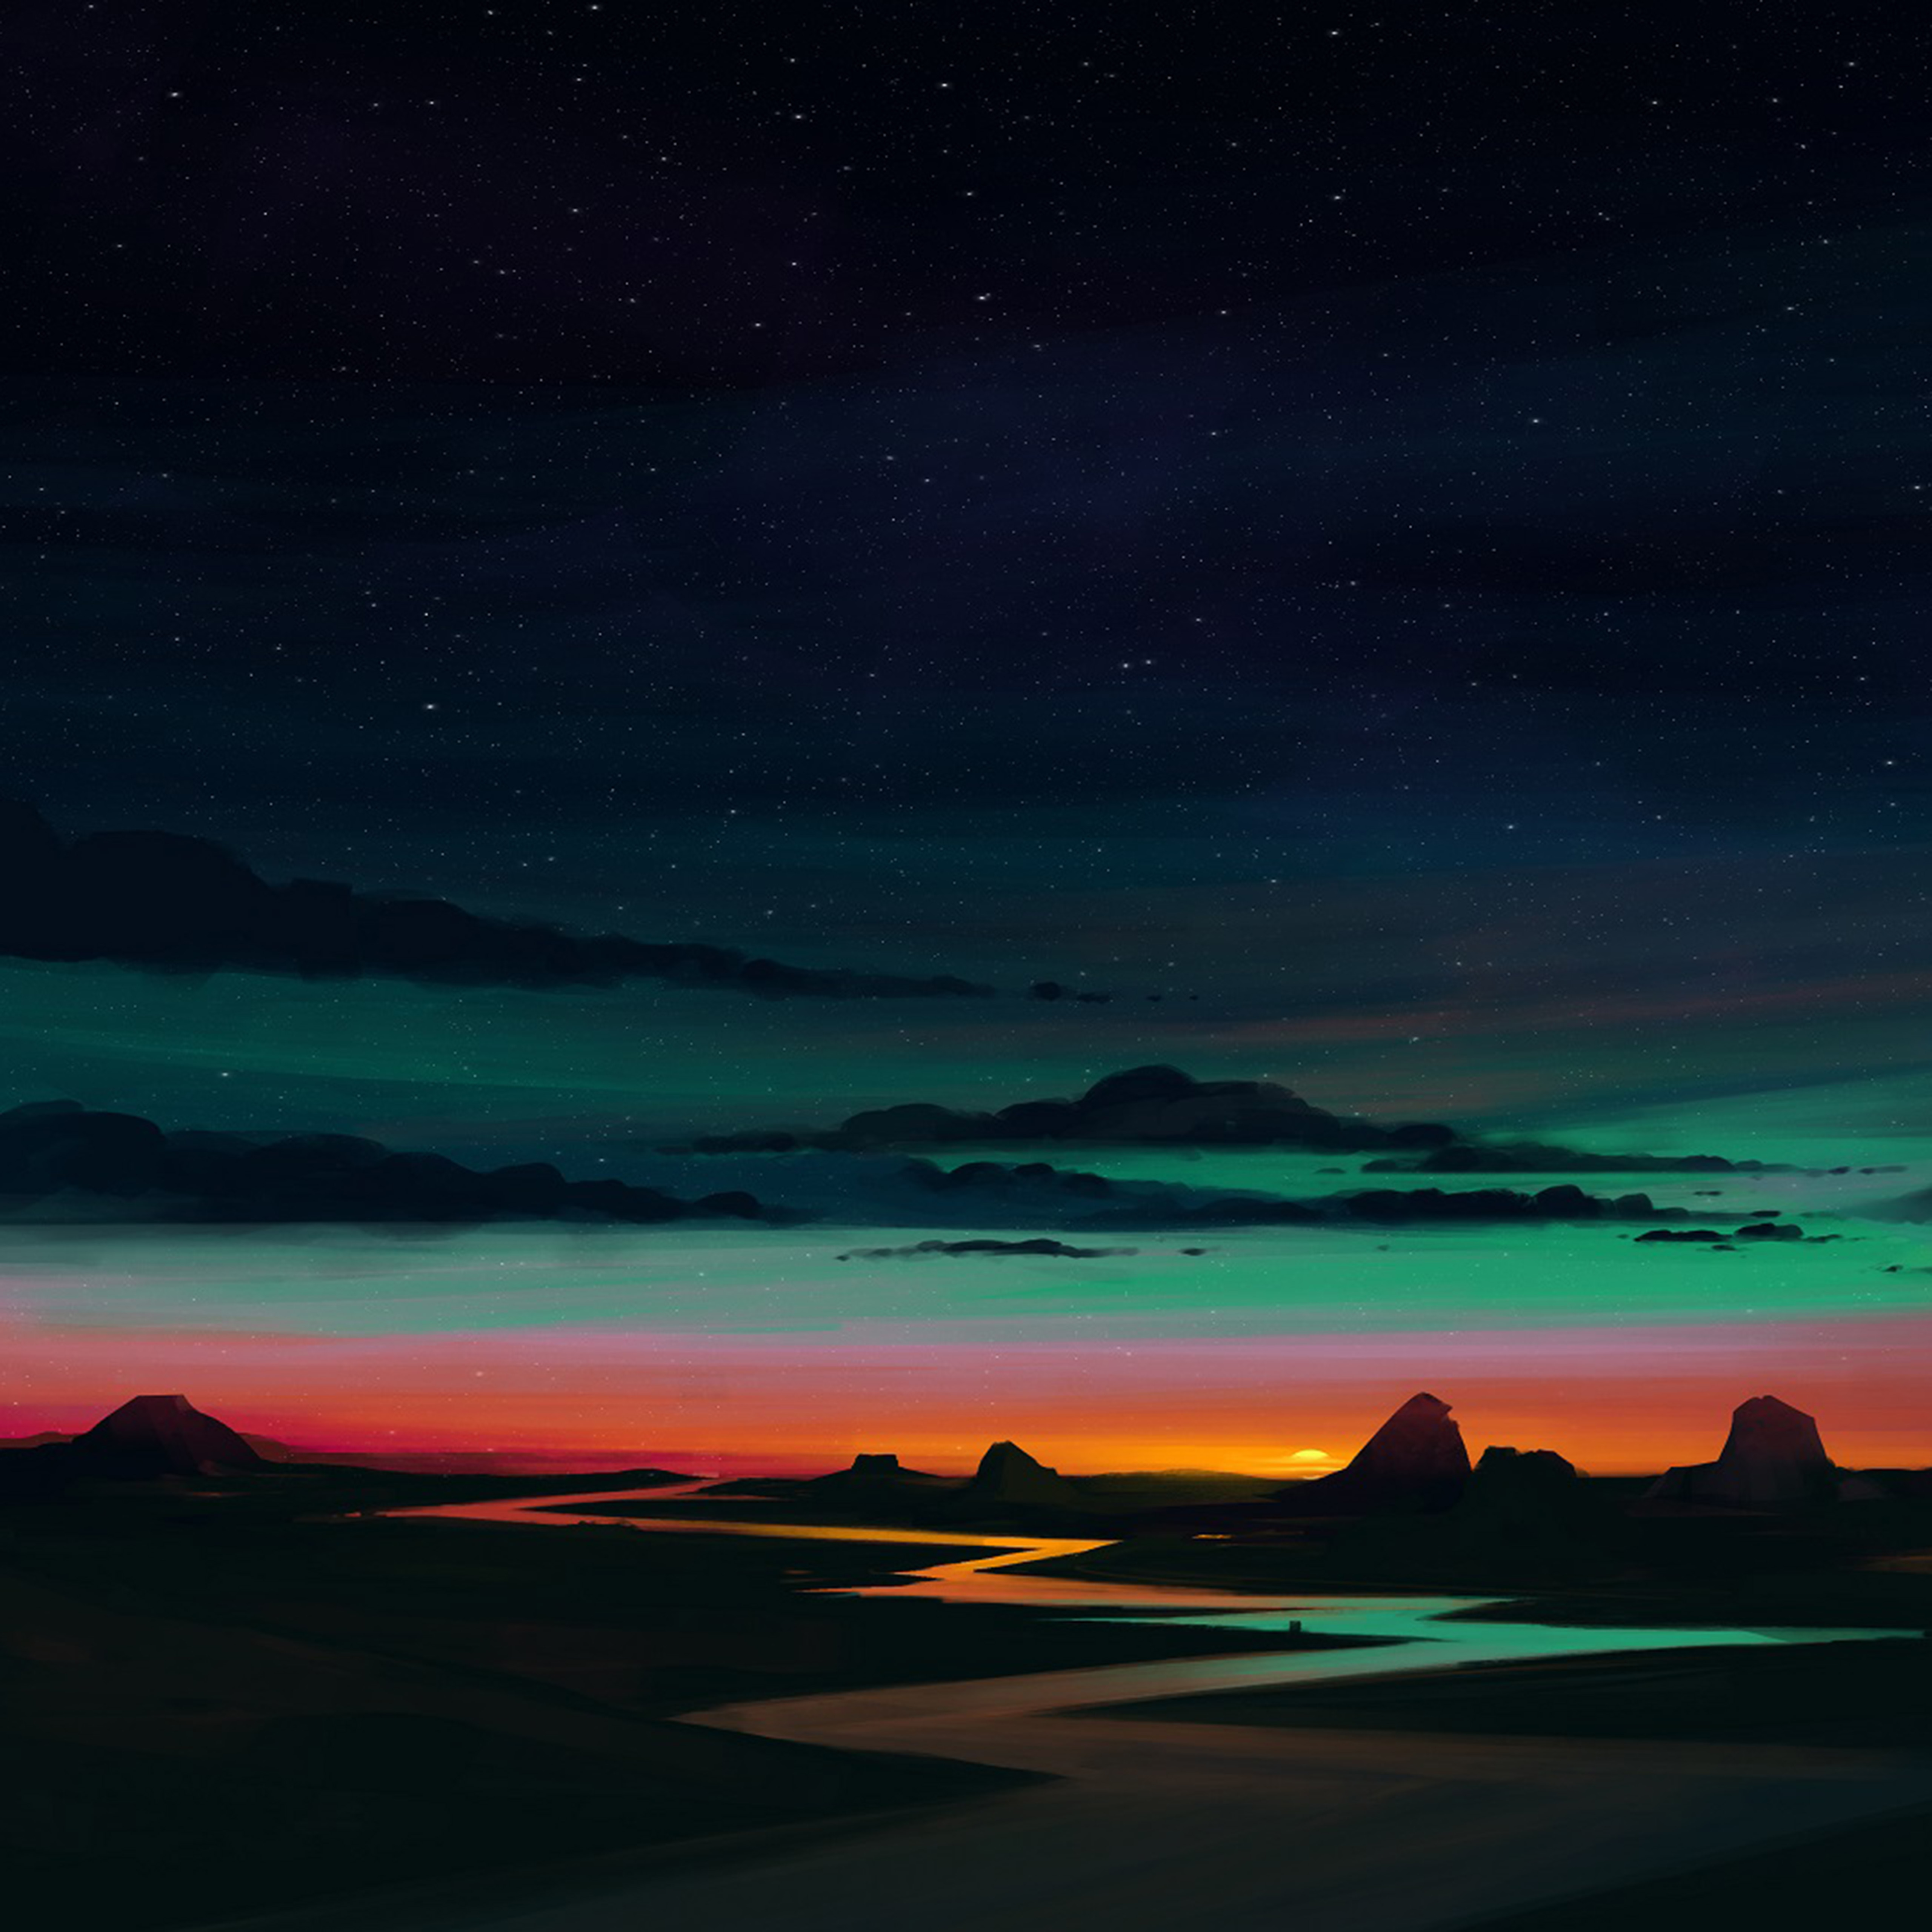 Sunrise wallpaper for iPhone and iPad